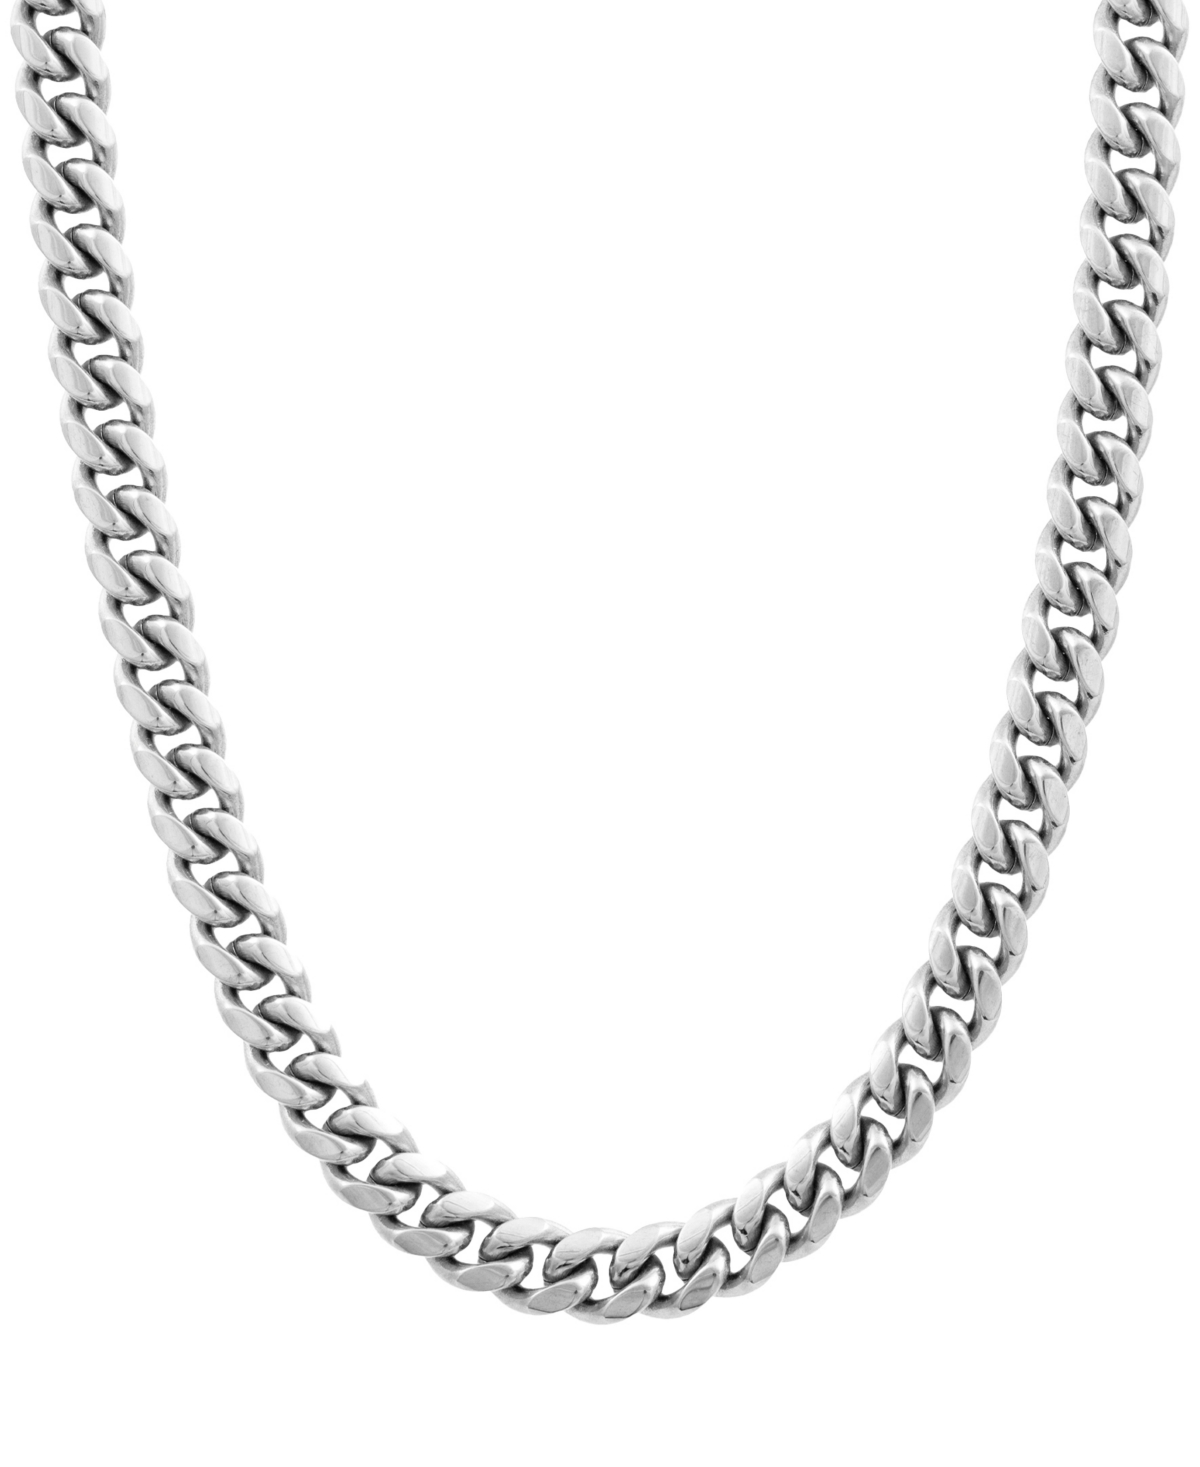 Shop Legacy For Men By Simone I. Smith Men's Bold Curb Link 24" Chain Necklace In Stainless Steel